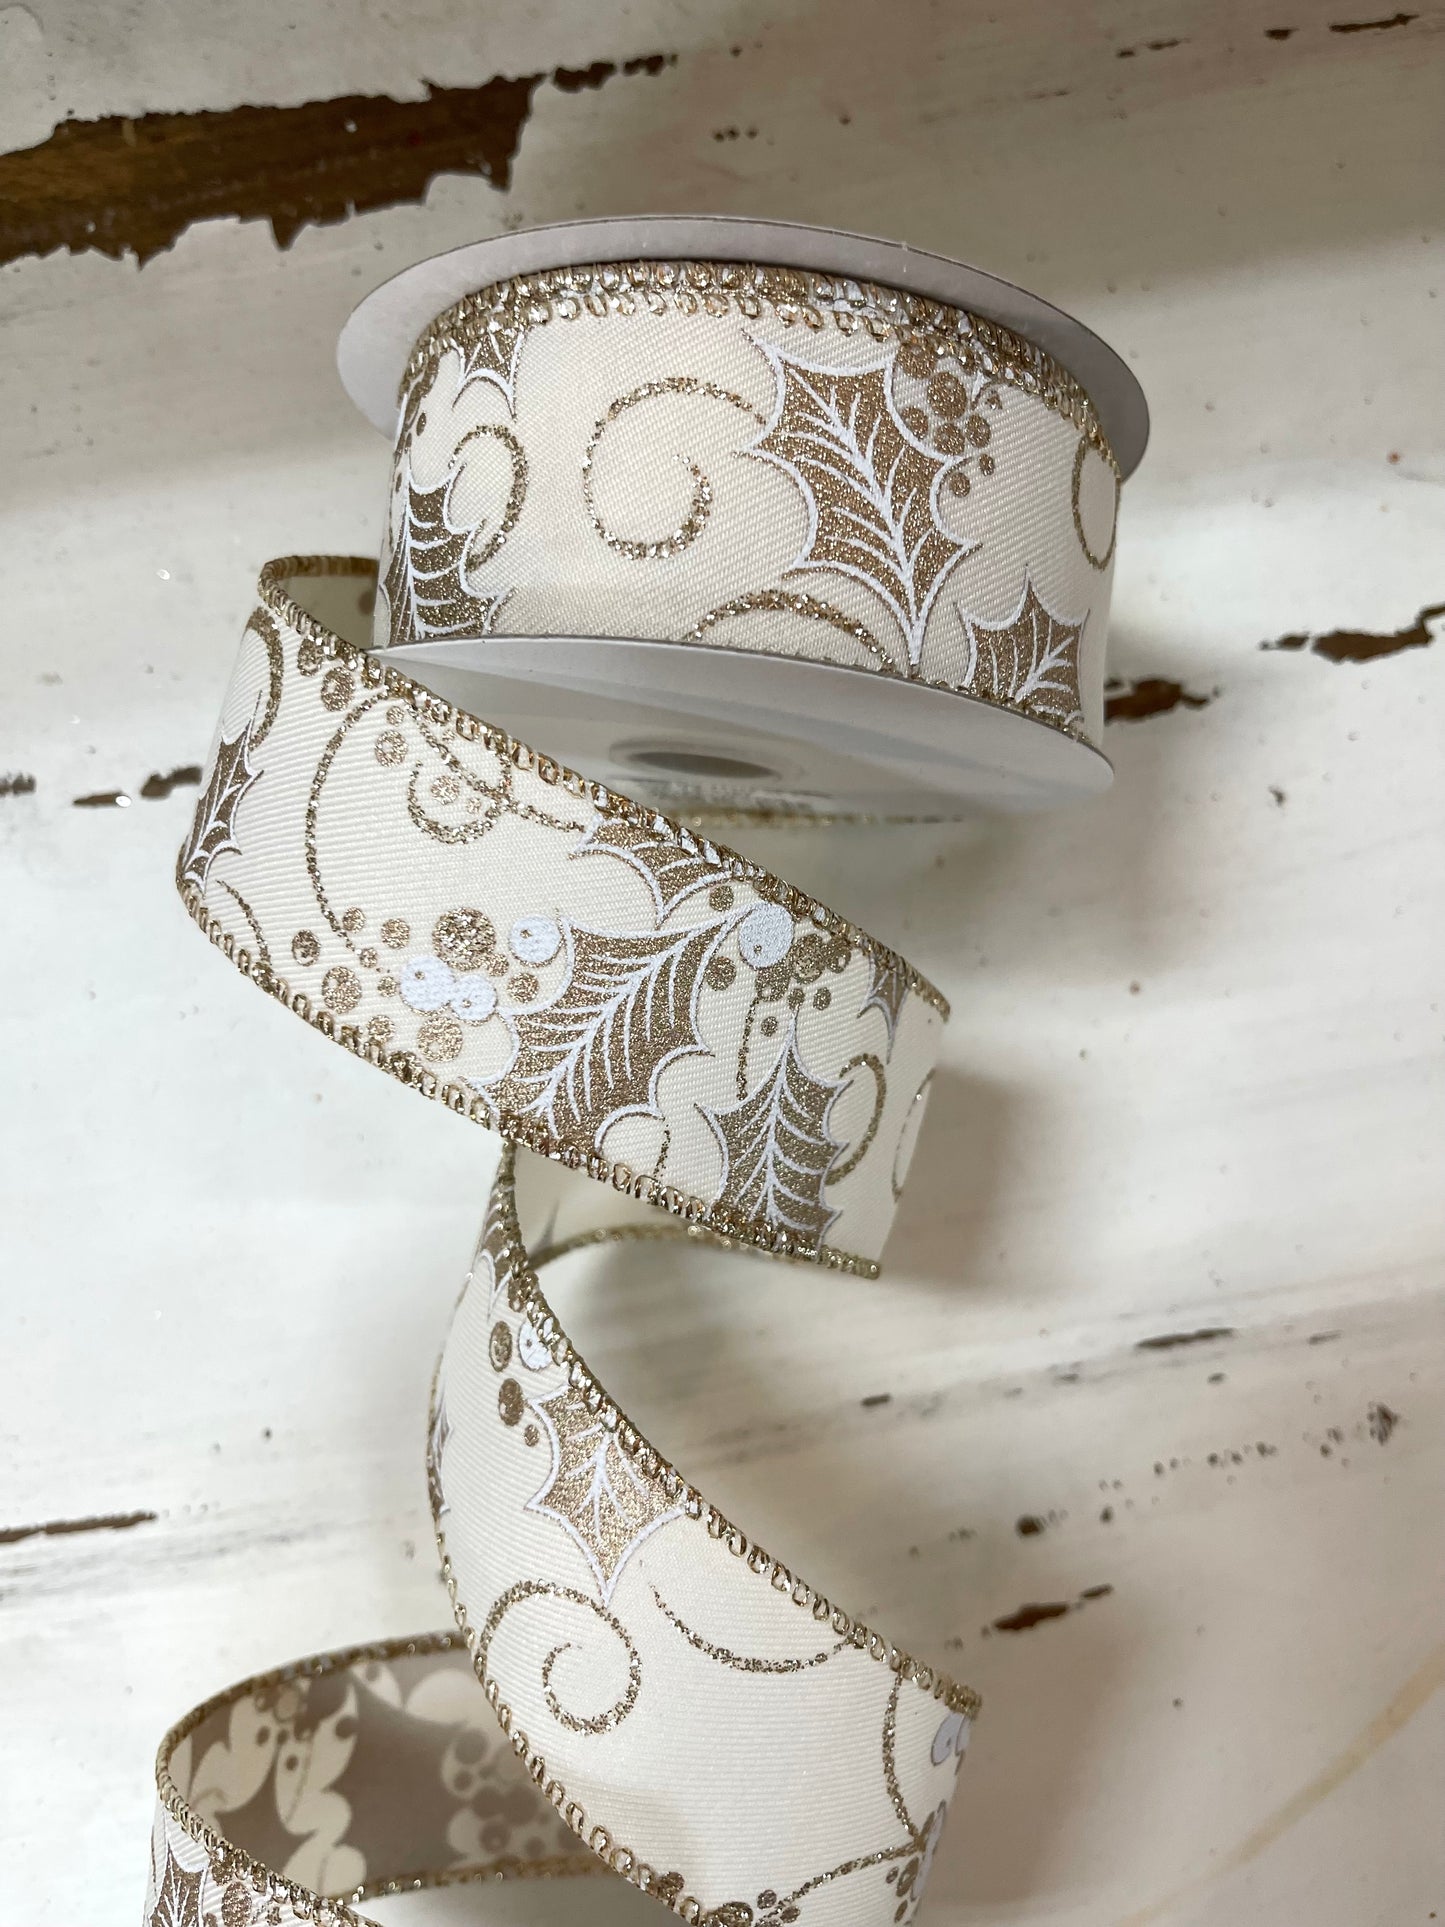 1.5 Inch Cream Champagne White Holly Berry Ribbon